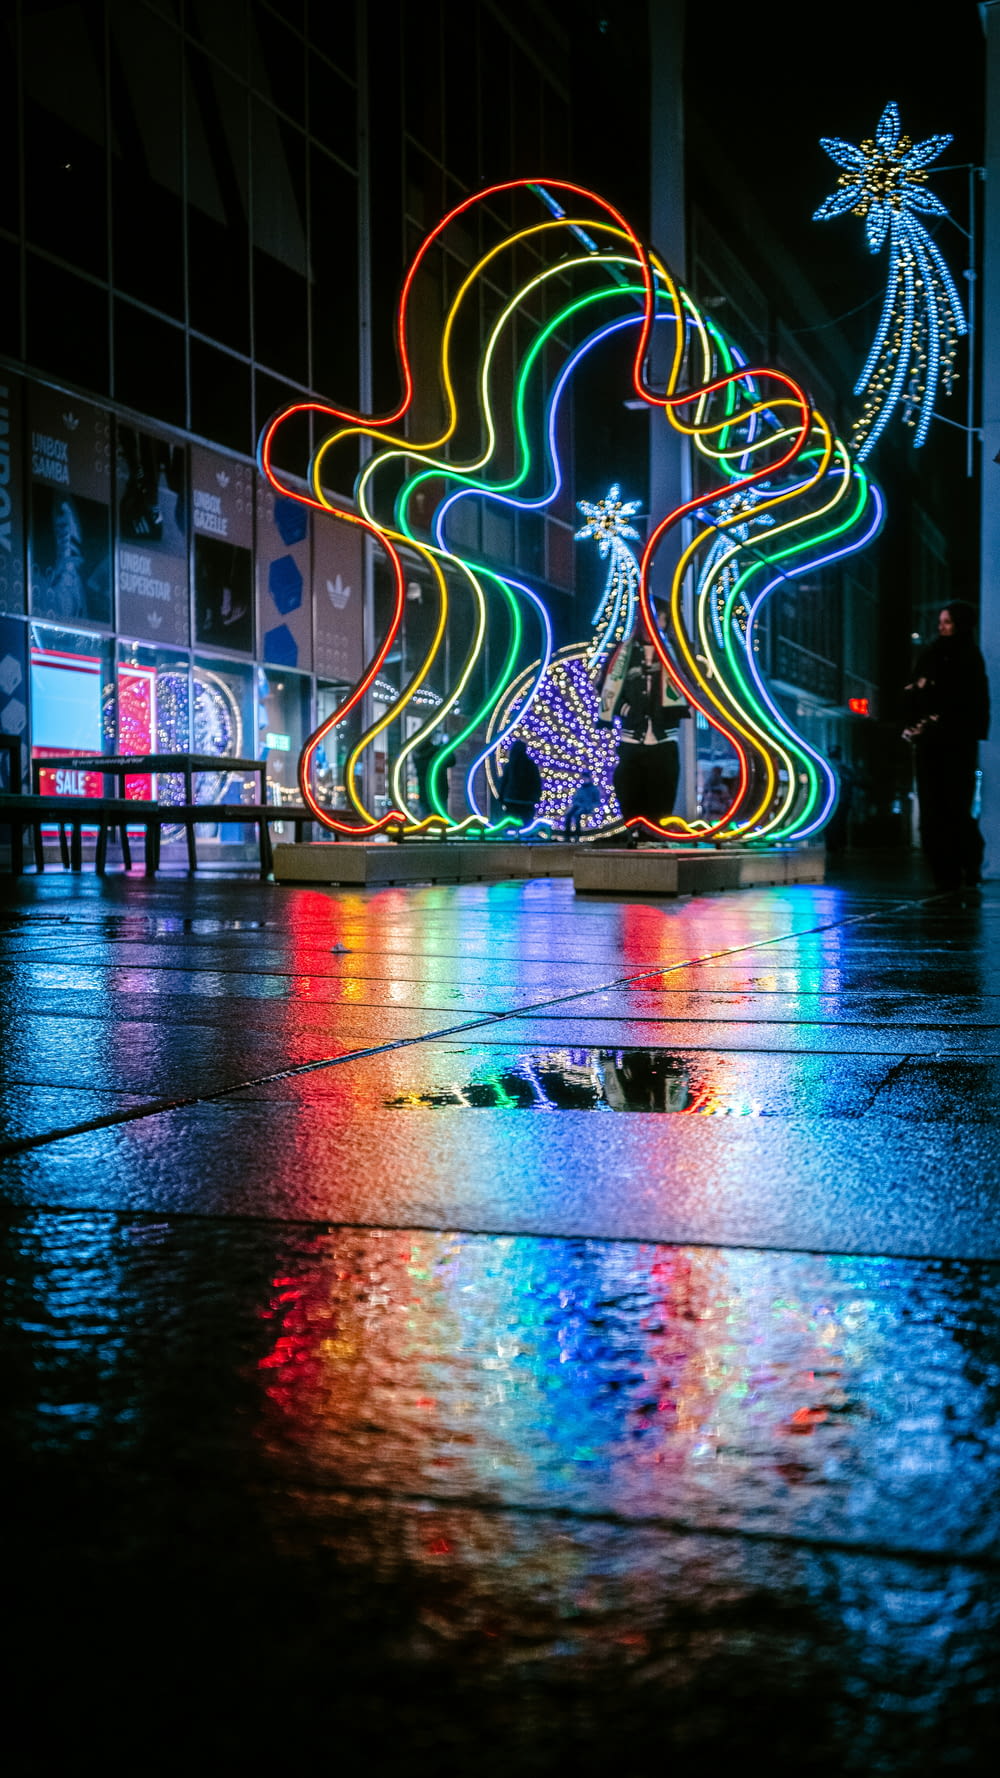 a colorful display of lights on a rainy night